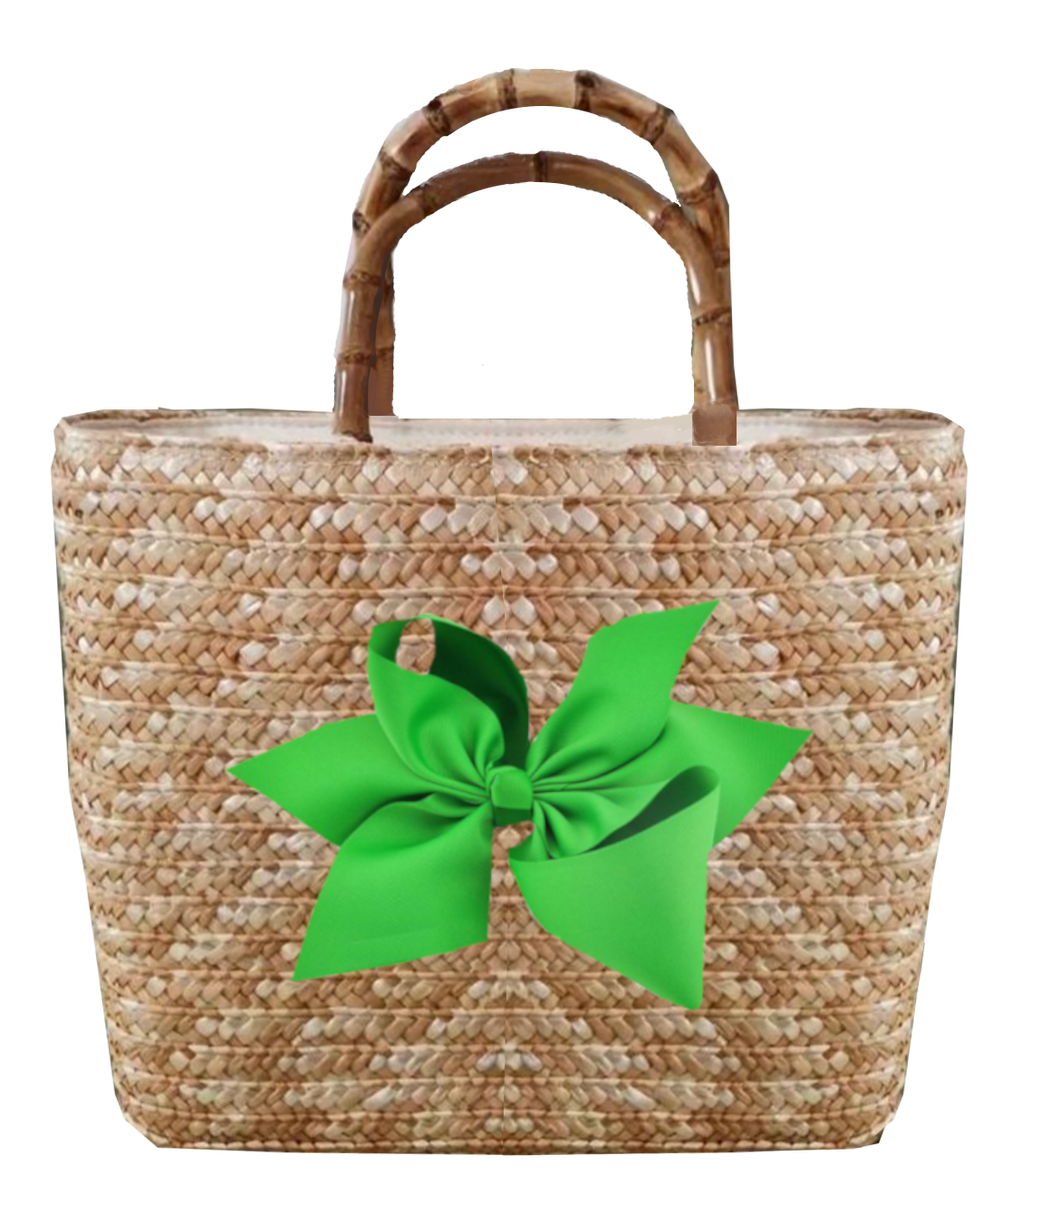 Sankaty Straw Tote with Interchangeable Bow - Green